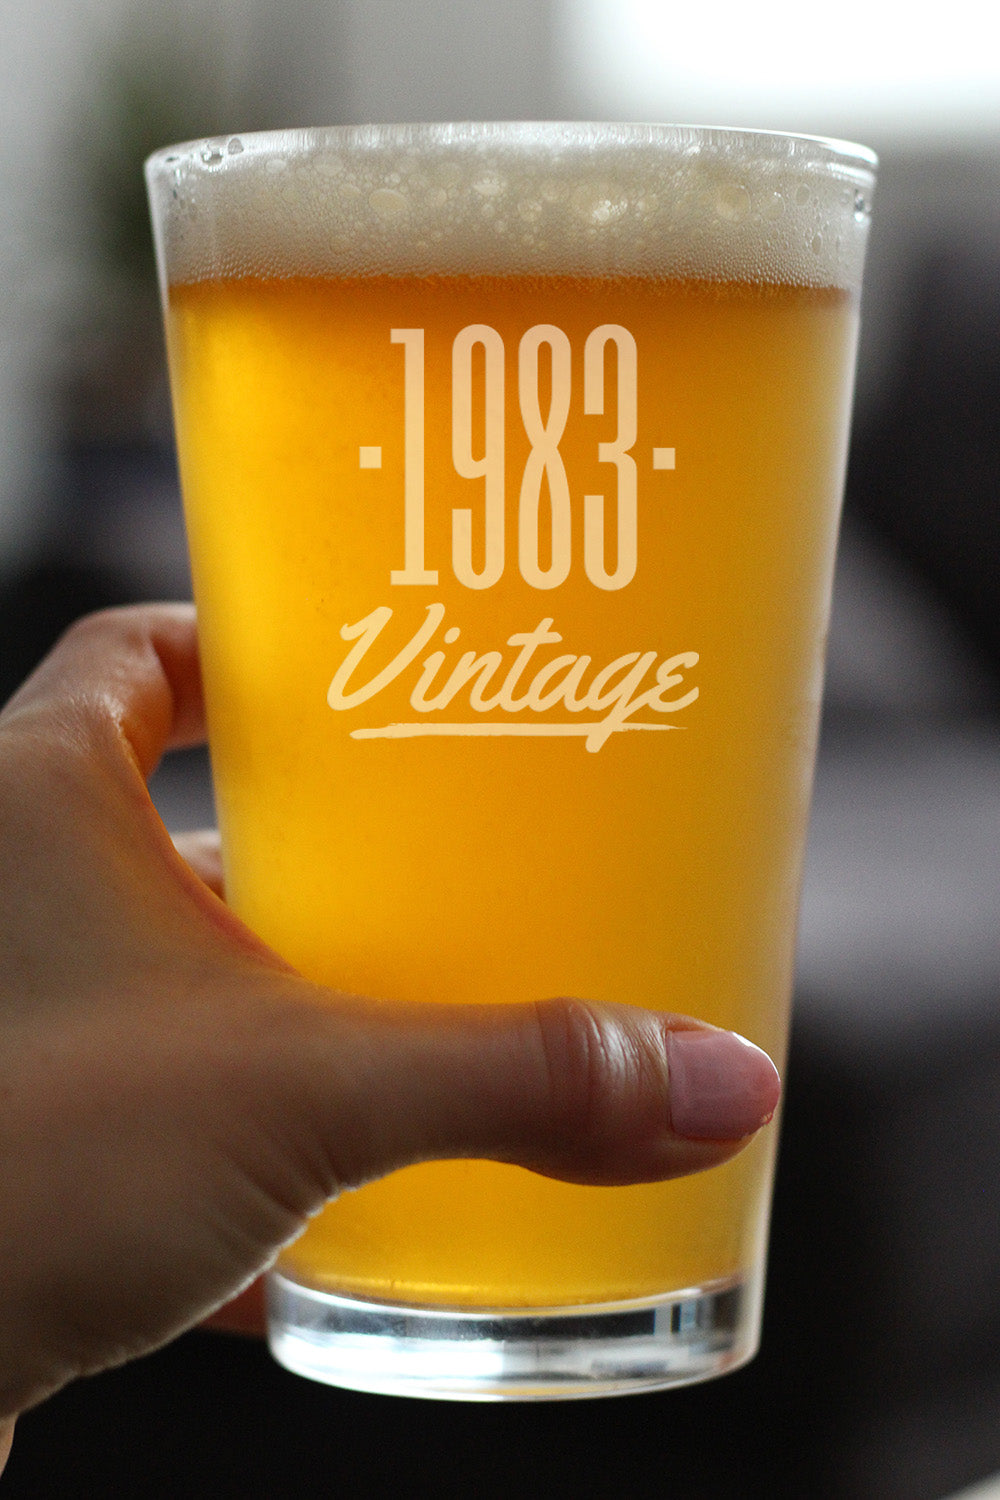 Vintage 1983 - Pint Glass for Beer - 40th Birthday Gifts for Men or Women Turning 40 - Fun Bday Party Decor - 16 oz